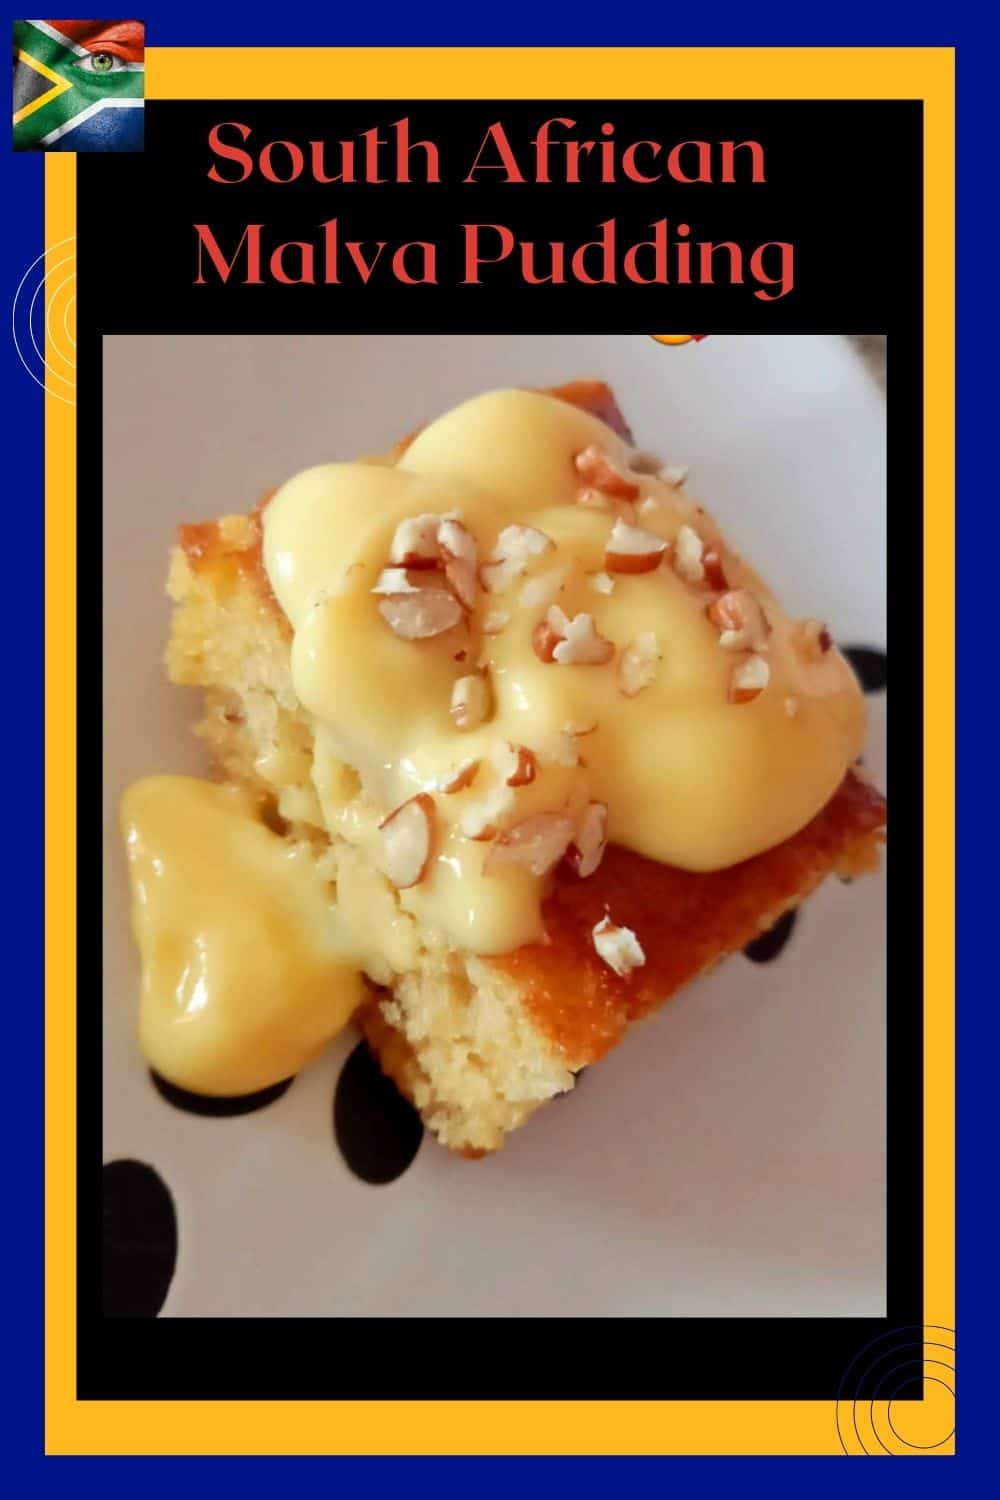 An image of a block of South African Malva Pudding with custard and nuts